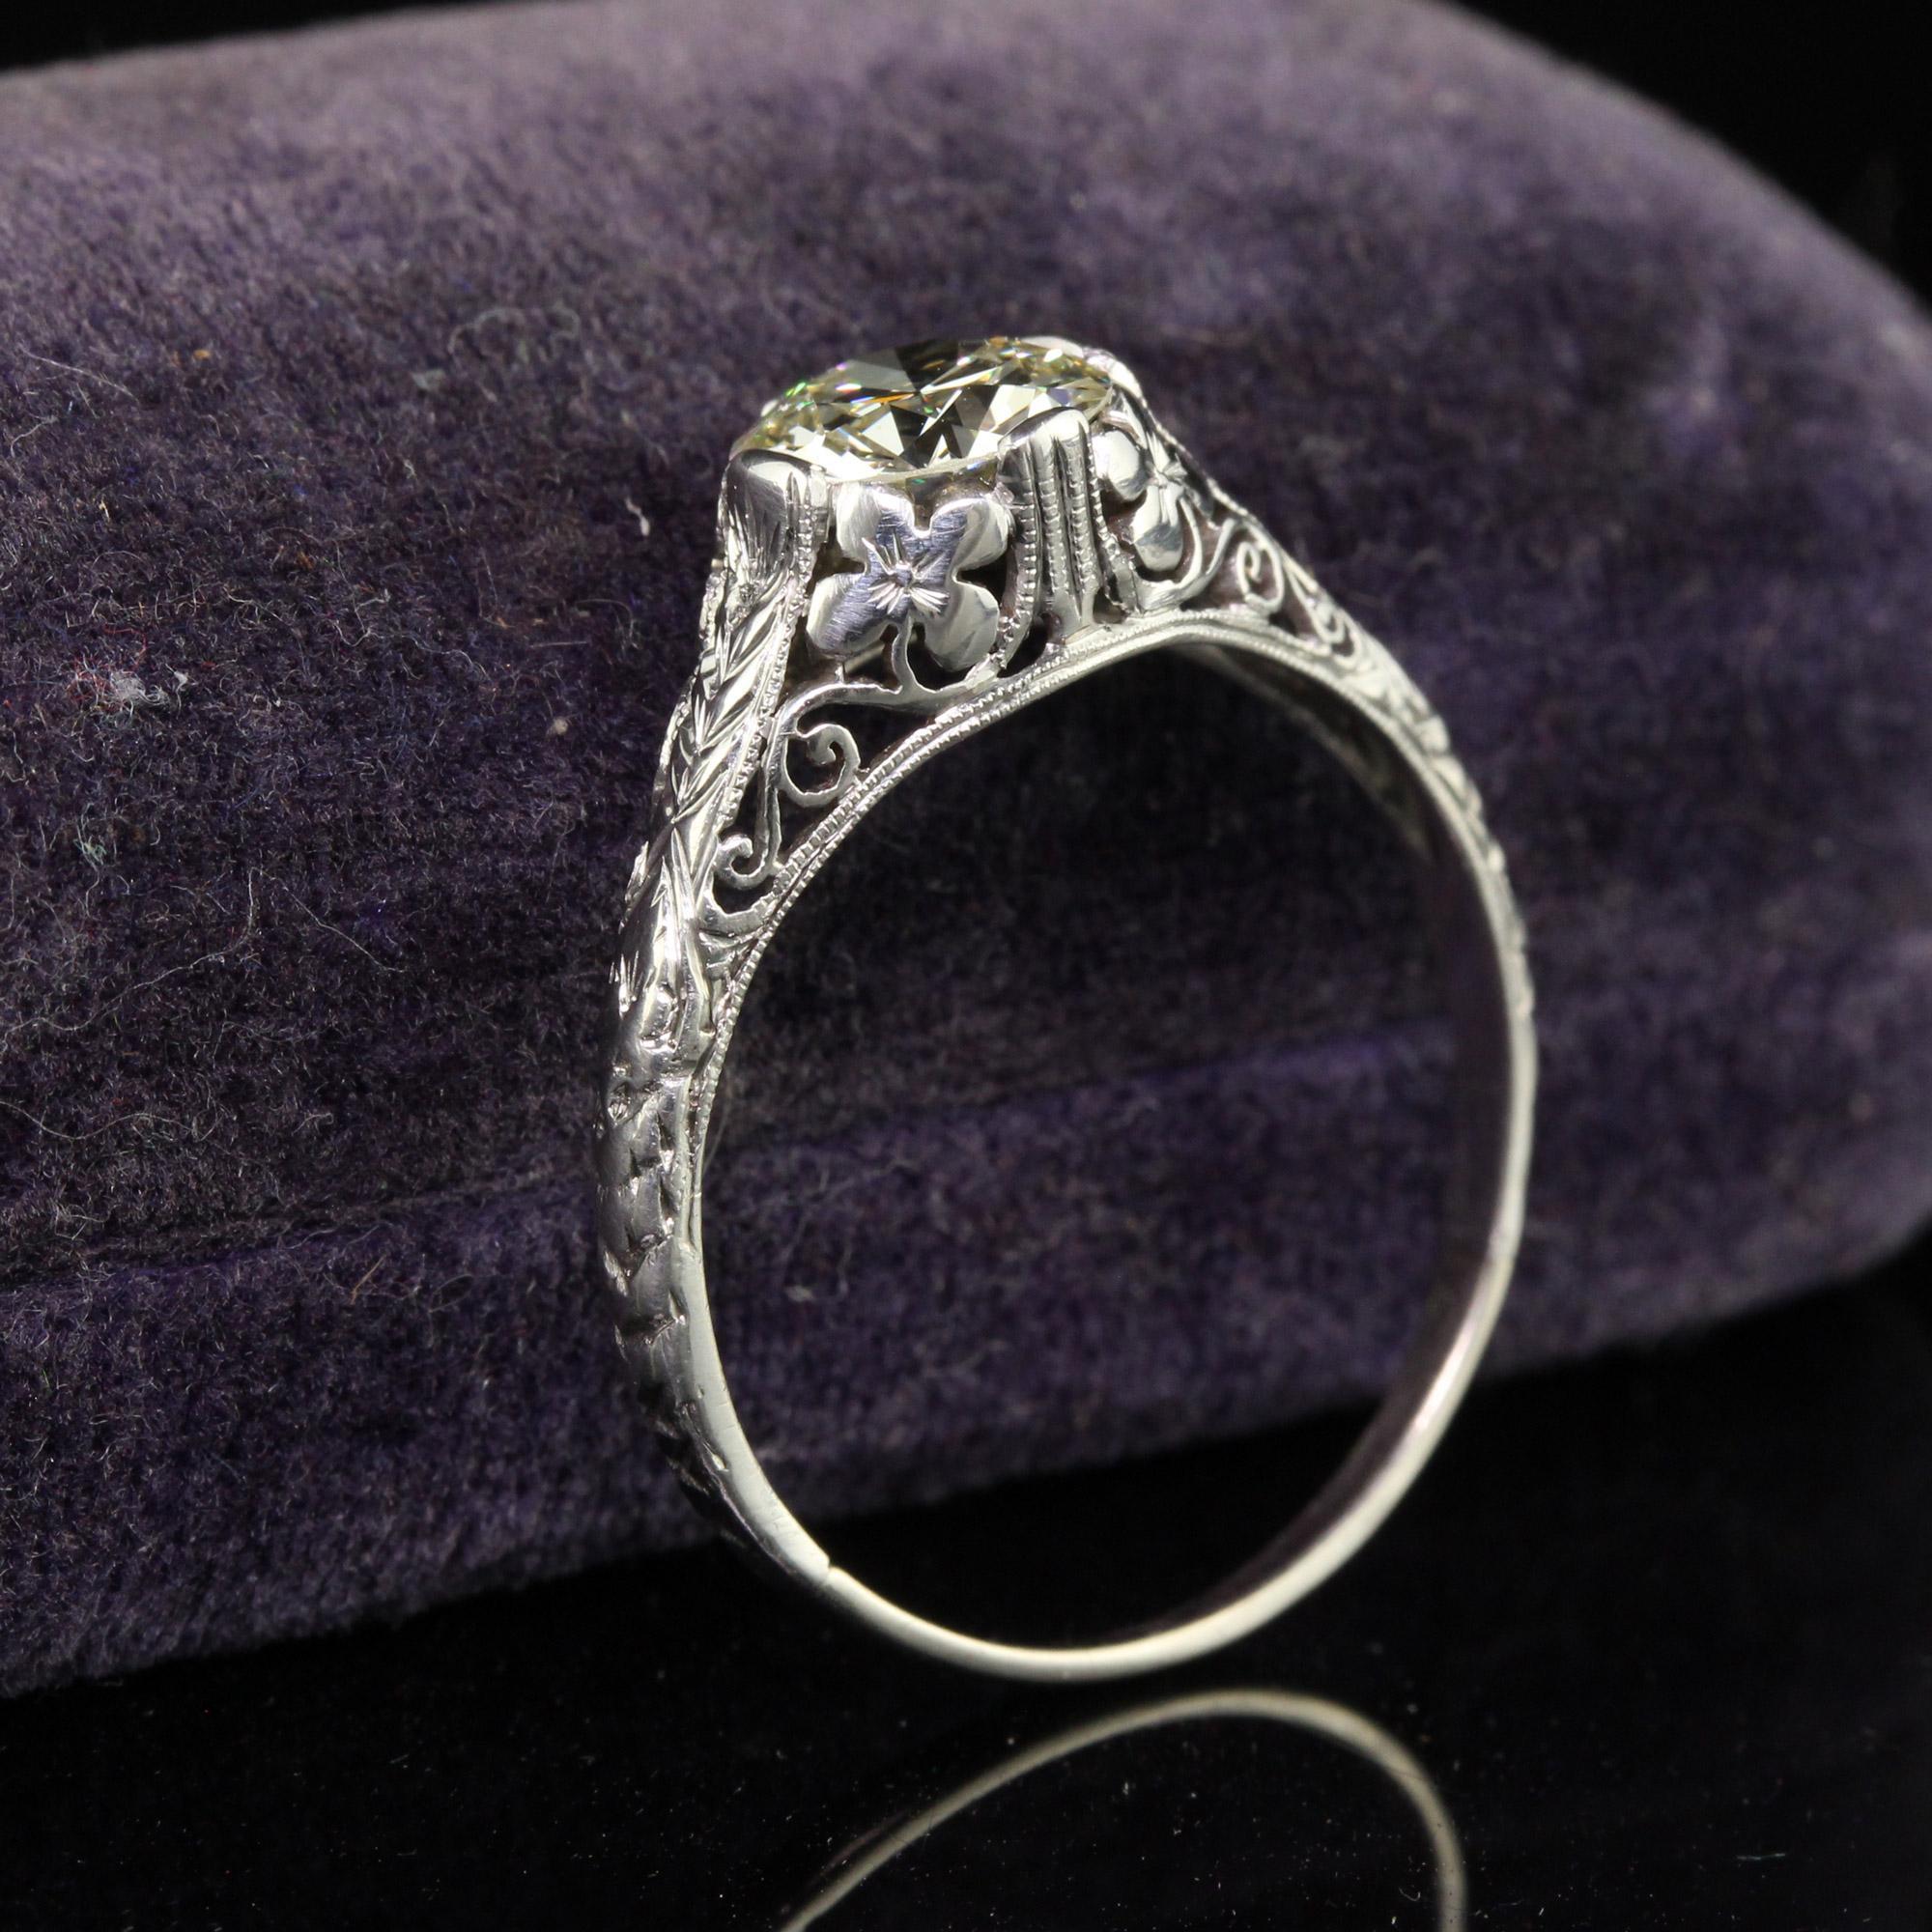 Antique Art Deco Platinum Old European Cut Diamond Engagement Ring - GIA In Good Condition For Sale In Great Neck, NY